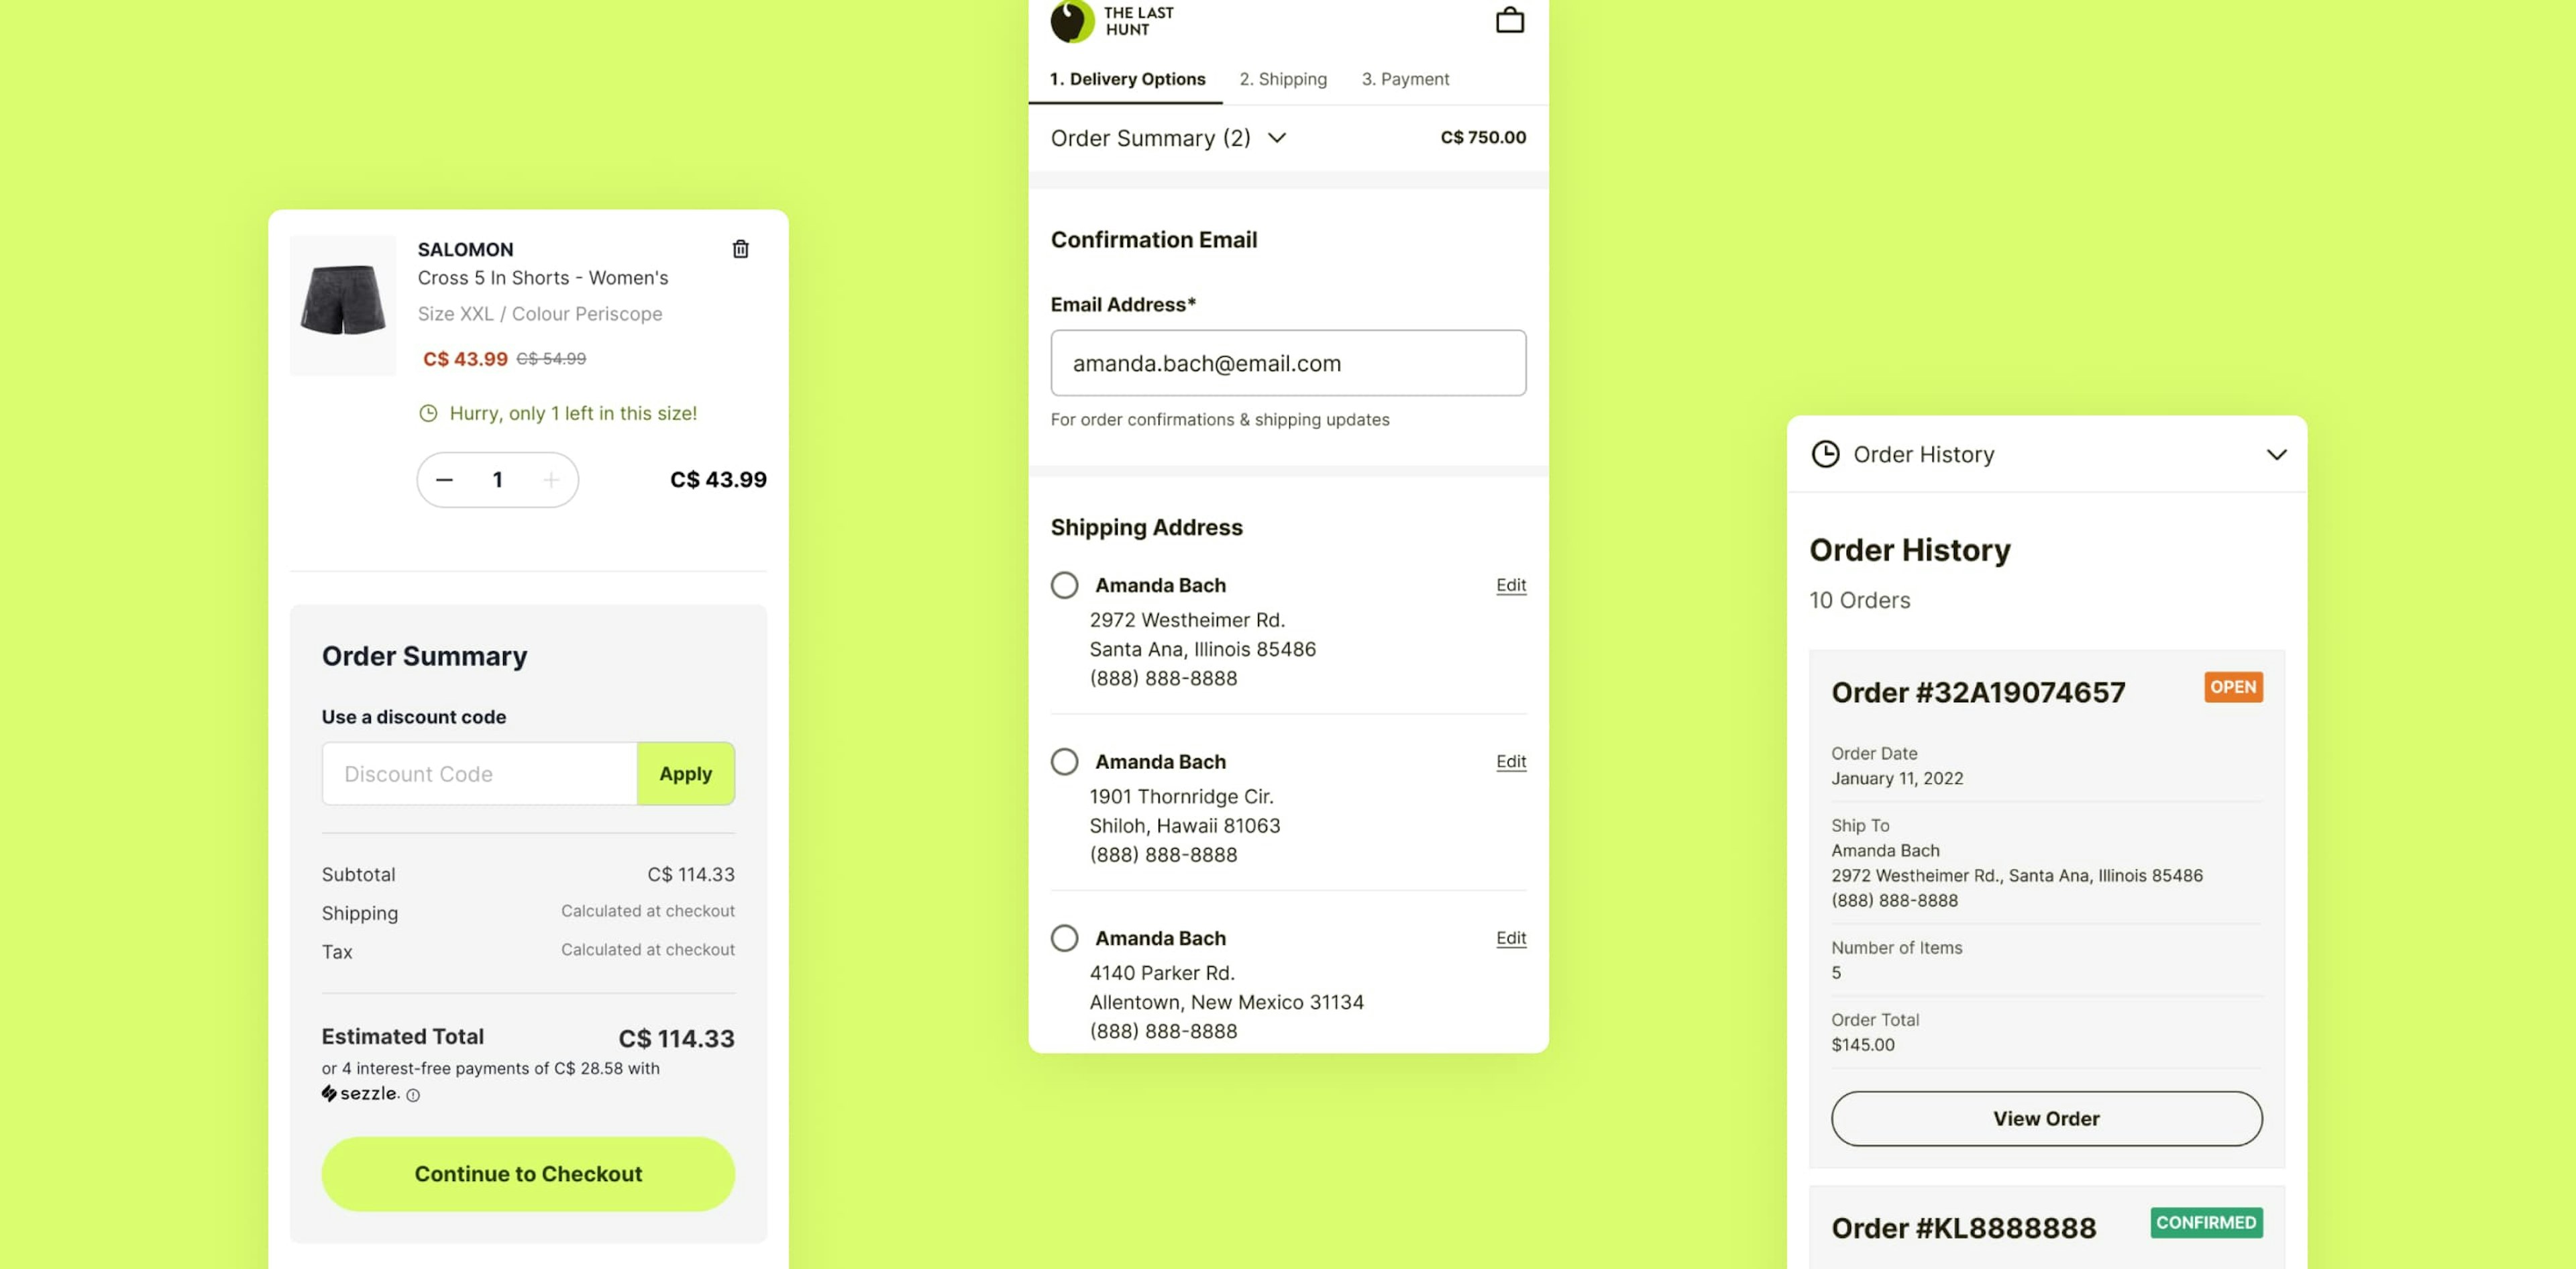 Screenshots of TheLastHunt's ordering journey showing the order summary, the checkout process, and the customer's order history.